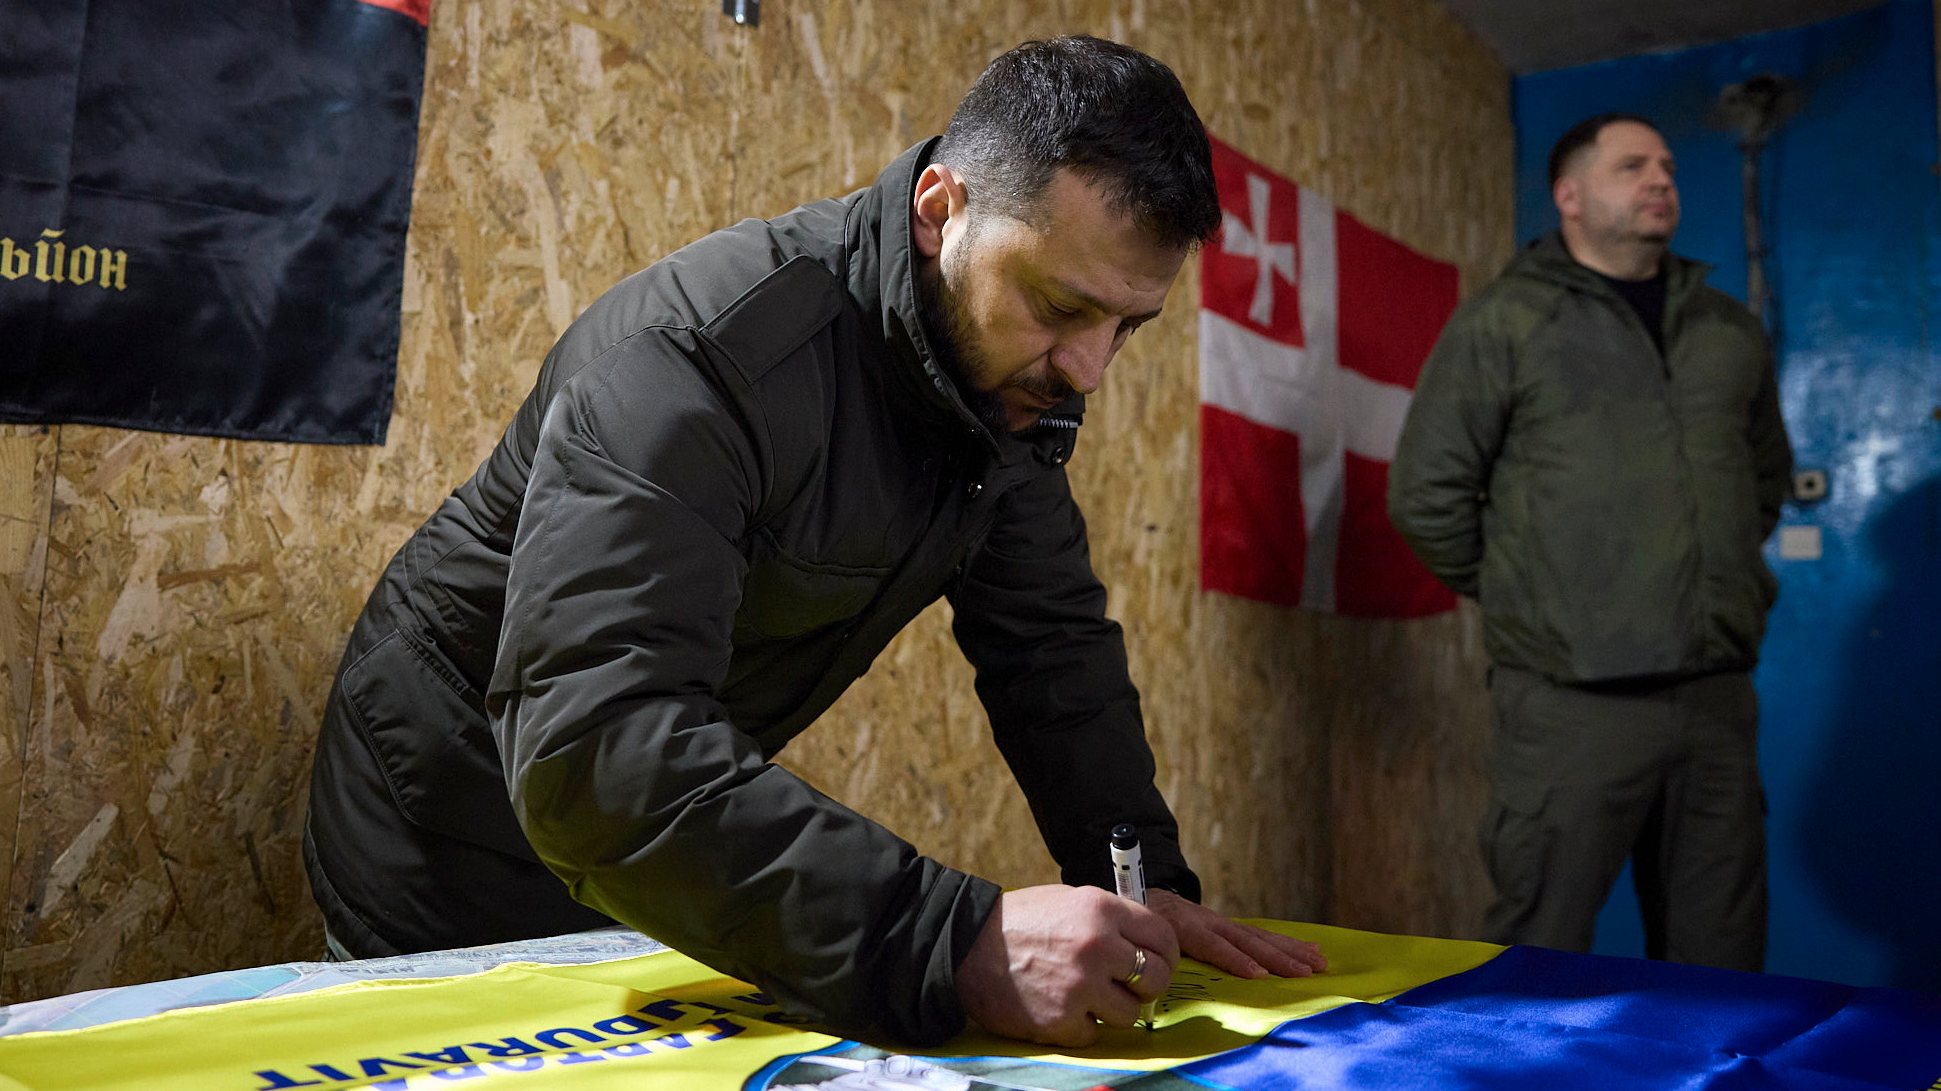 epa11166132 A handout picture made available by the Presidential Press Service shows President of Ukraine Volodymyr Zelensky signing a flag during his visit to the battalion command post of the 14th separate mechanized brigade named after Prince Roman the Great, near a frontline in the Kupyansk area, Ukraine, 19 February 2024 amid the Russian invasion. Russian troops entered Ukrainian territory on 24 February 2022, starting a conflict that has provoked destruction and a humanitarian crisis.  EPA/PRESIDENTIAL PRESS SERVICE HANDOUT HANDOUT 44296 HANDOUT EDITORIAL USE ONLY/NO SALES HANDOUT EDITORIAL USE ONLY/NO SALES